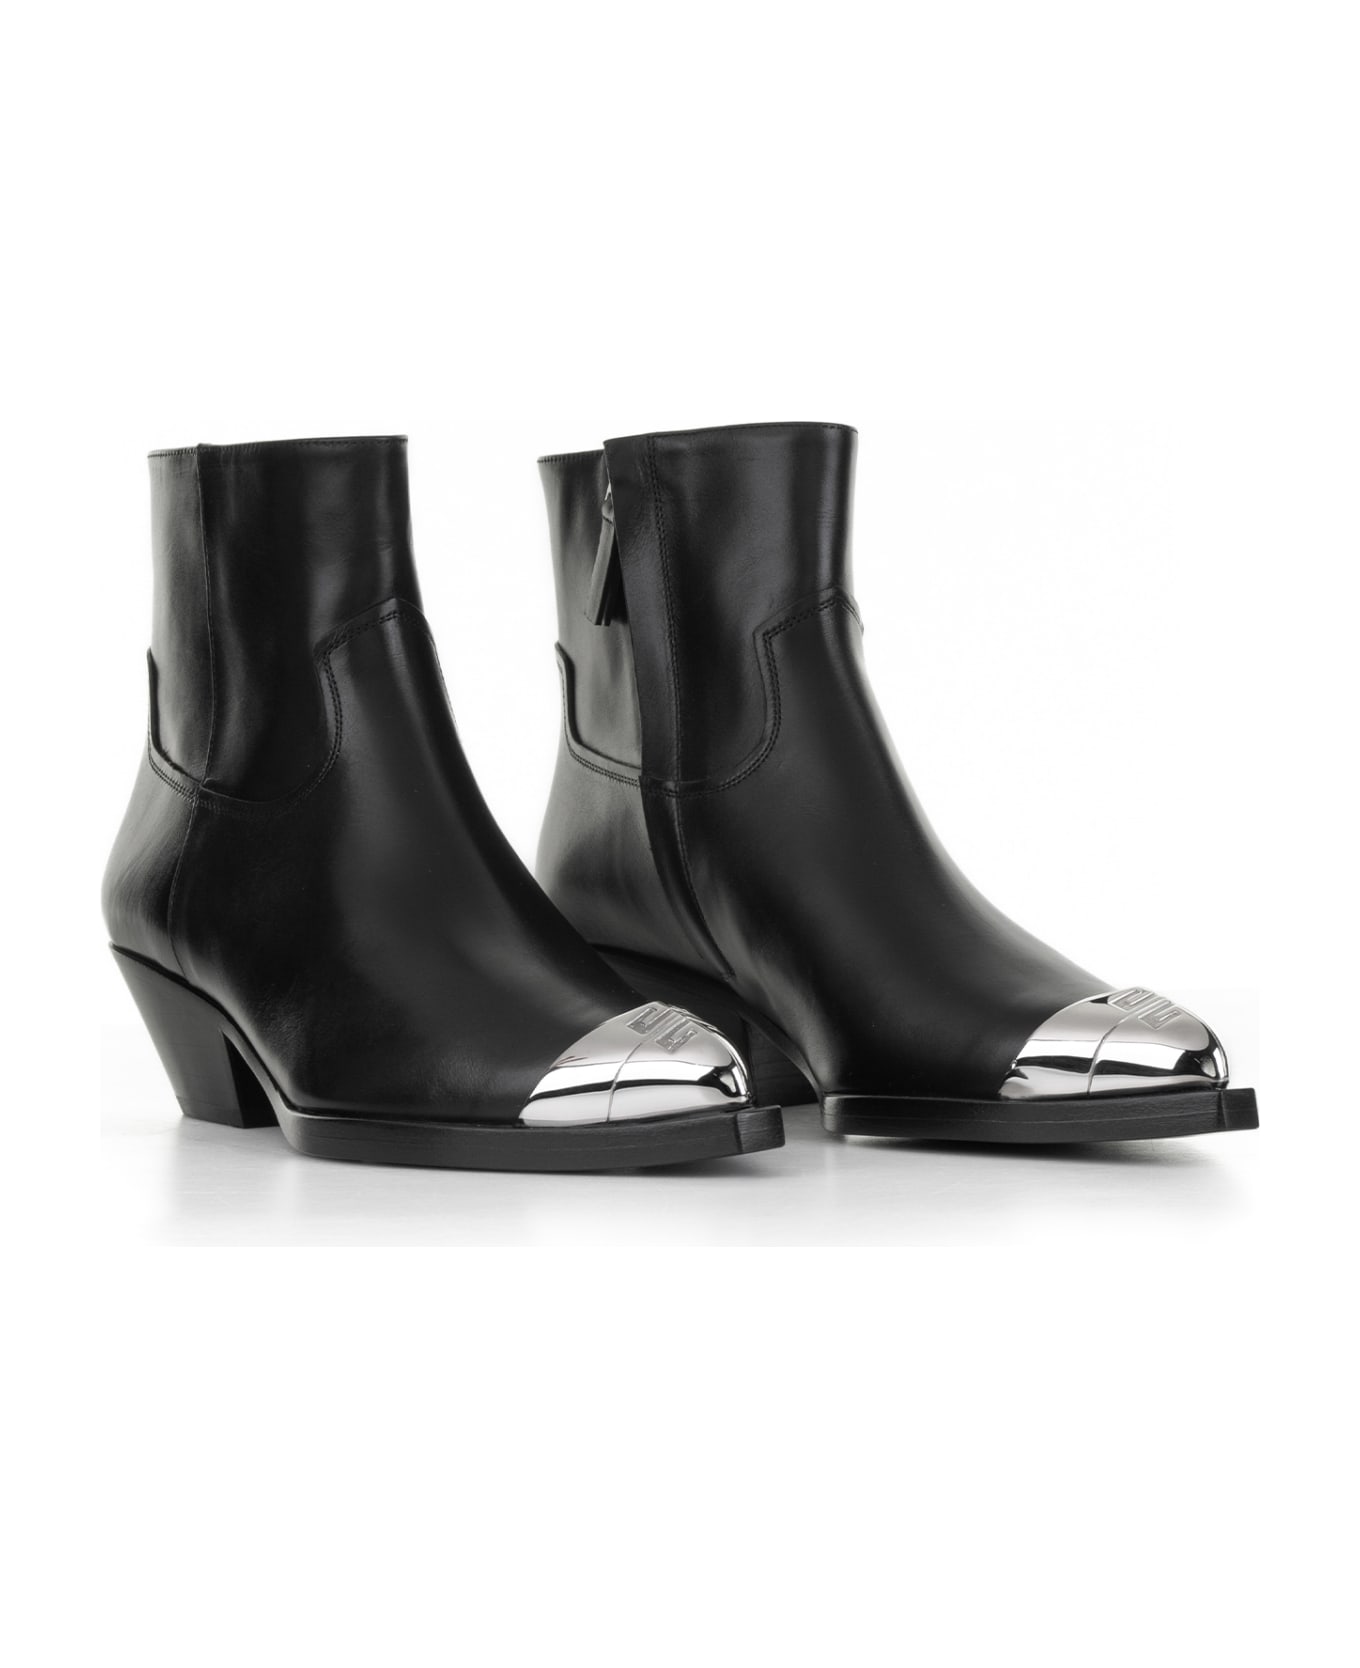 Givenchy Ankle Boots - NERO ブーツ